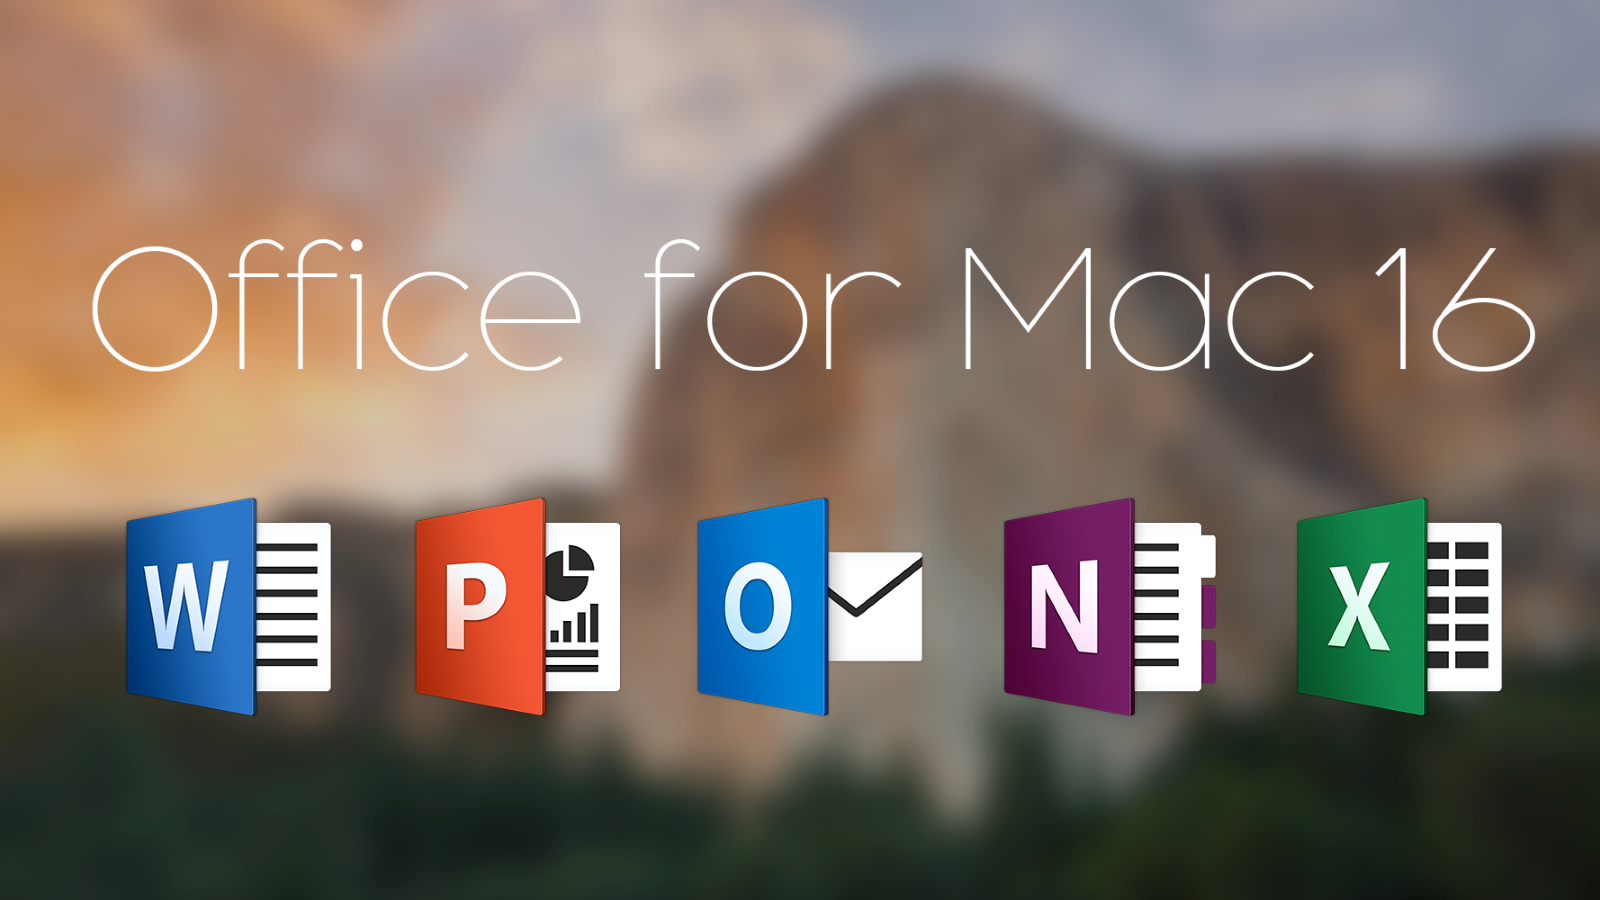 microsoft office for mac free download full version 2019